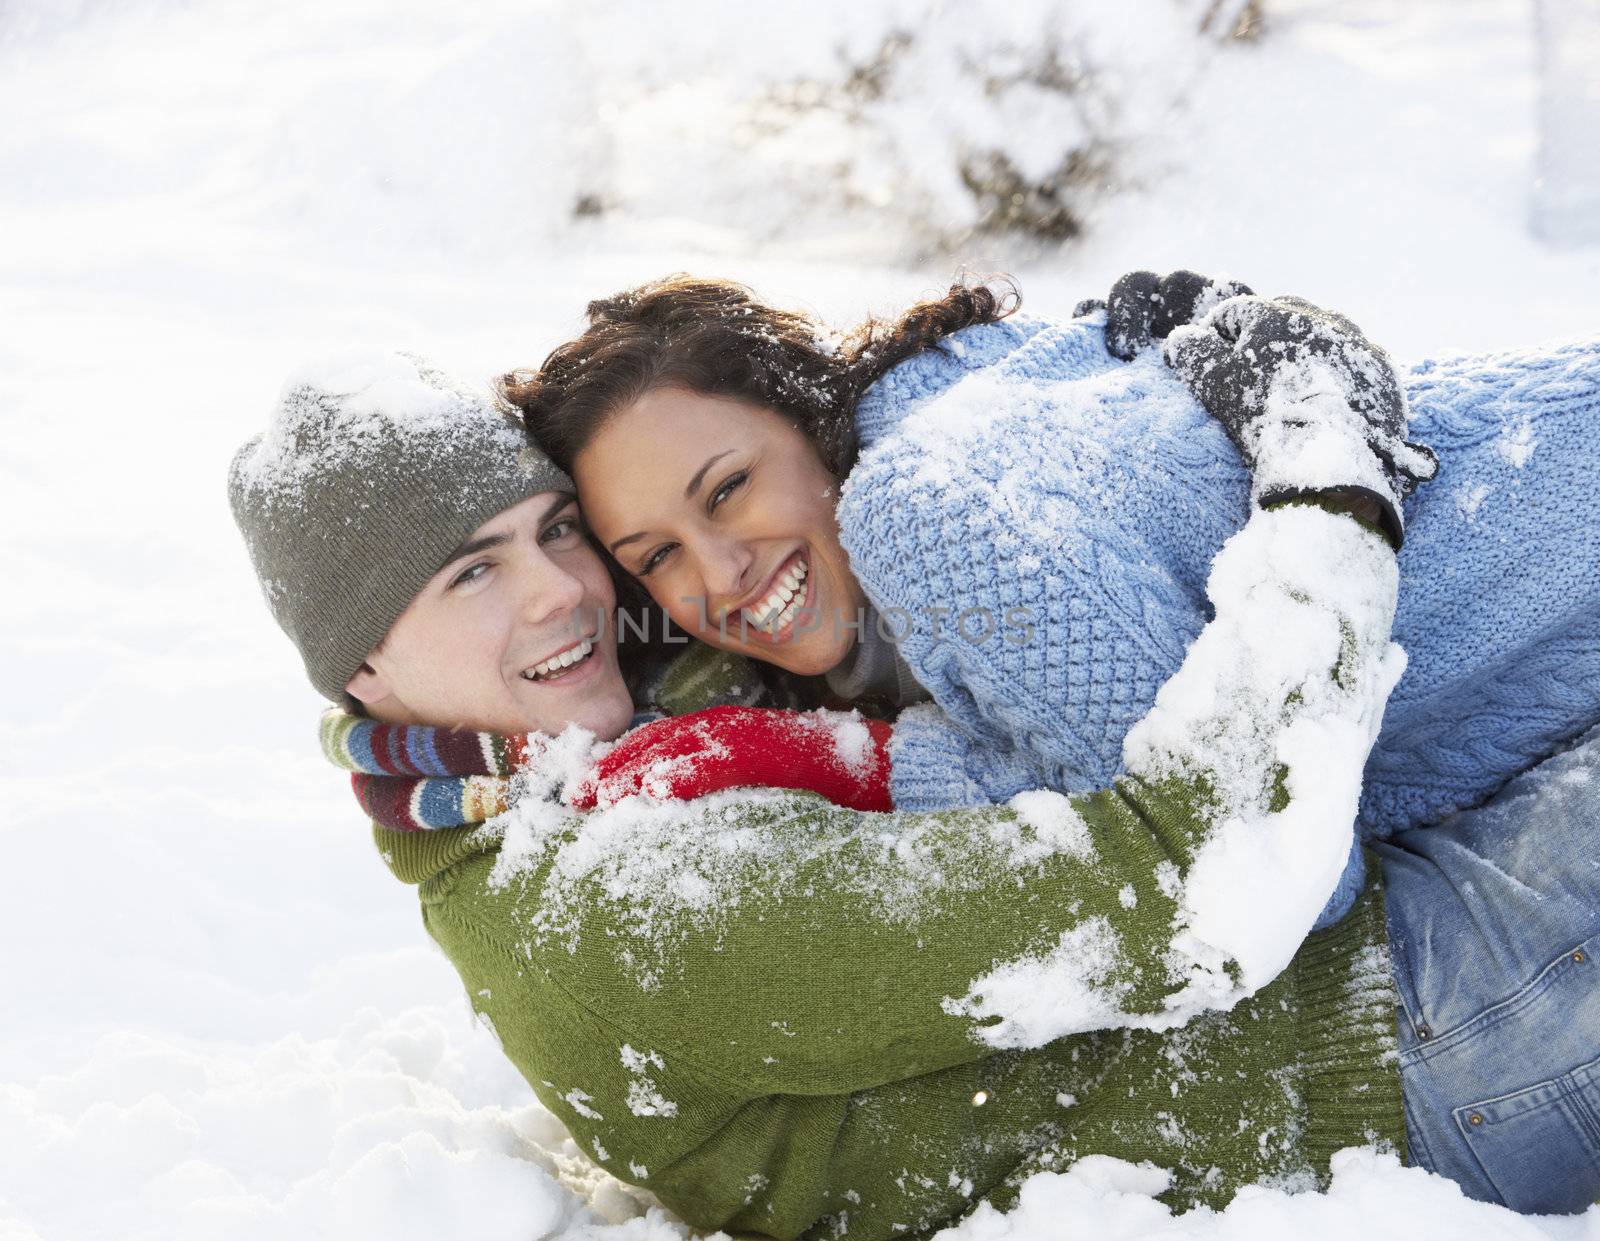 Romantic Couple Having Fun In Snow by omg_images